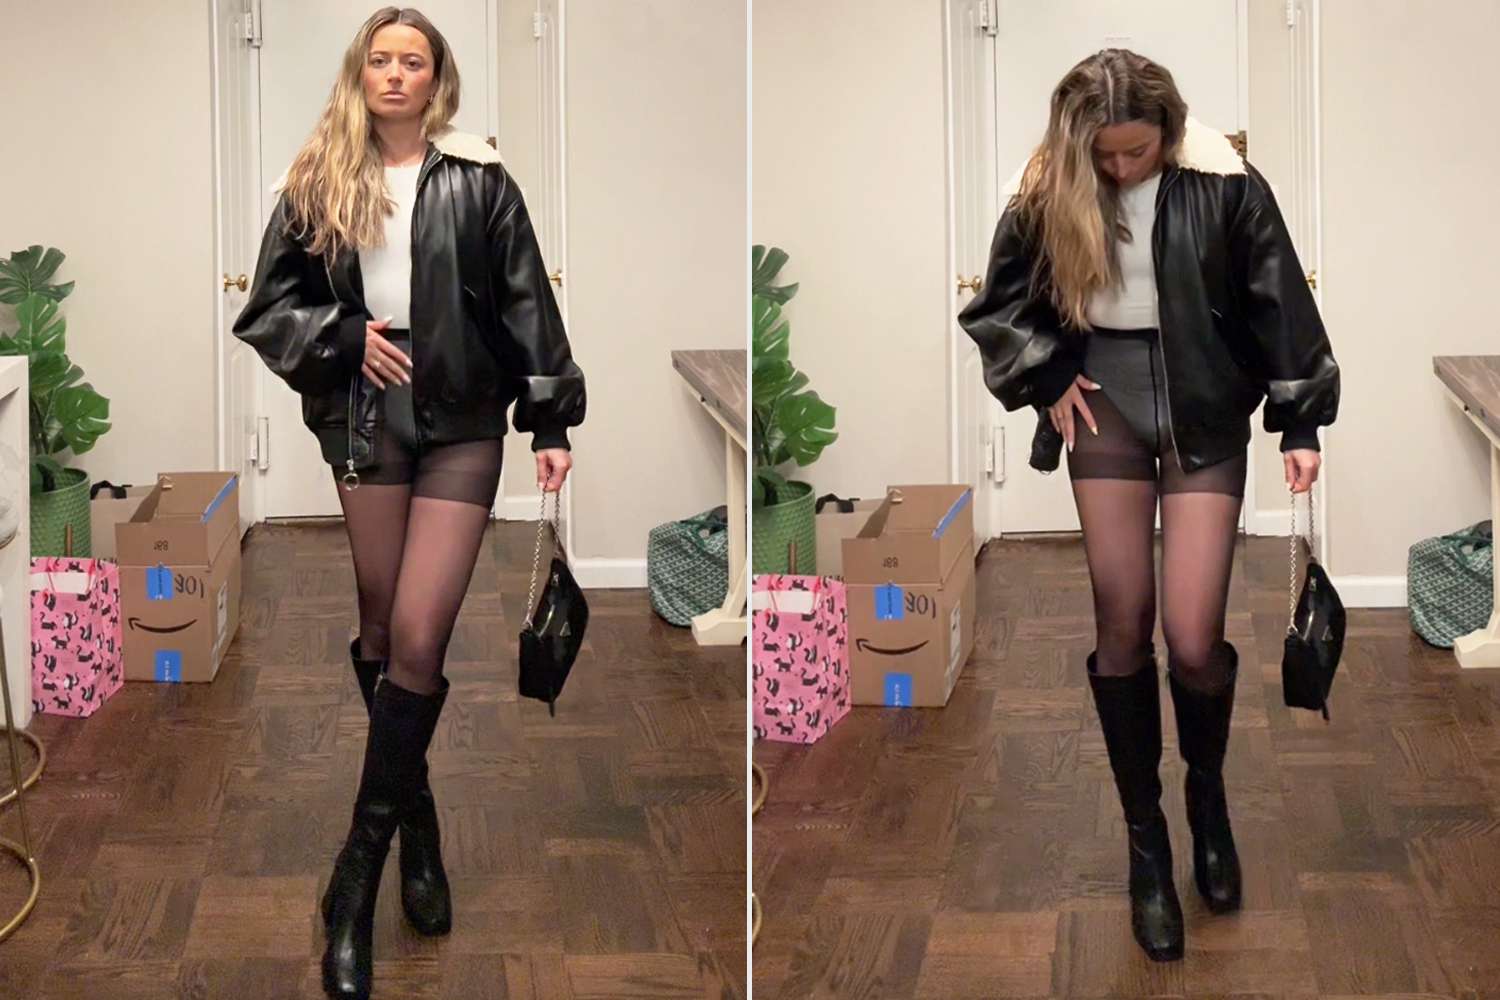 Woman Attempts to Show Off Outfit of the Day, Then Realizes She's Not Wearing Pants in Now-Viral Video (Exclusive)